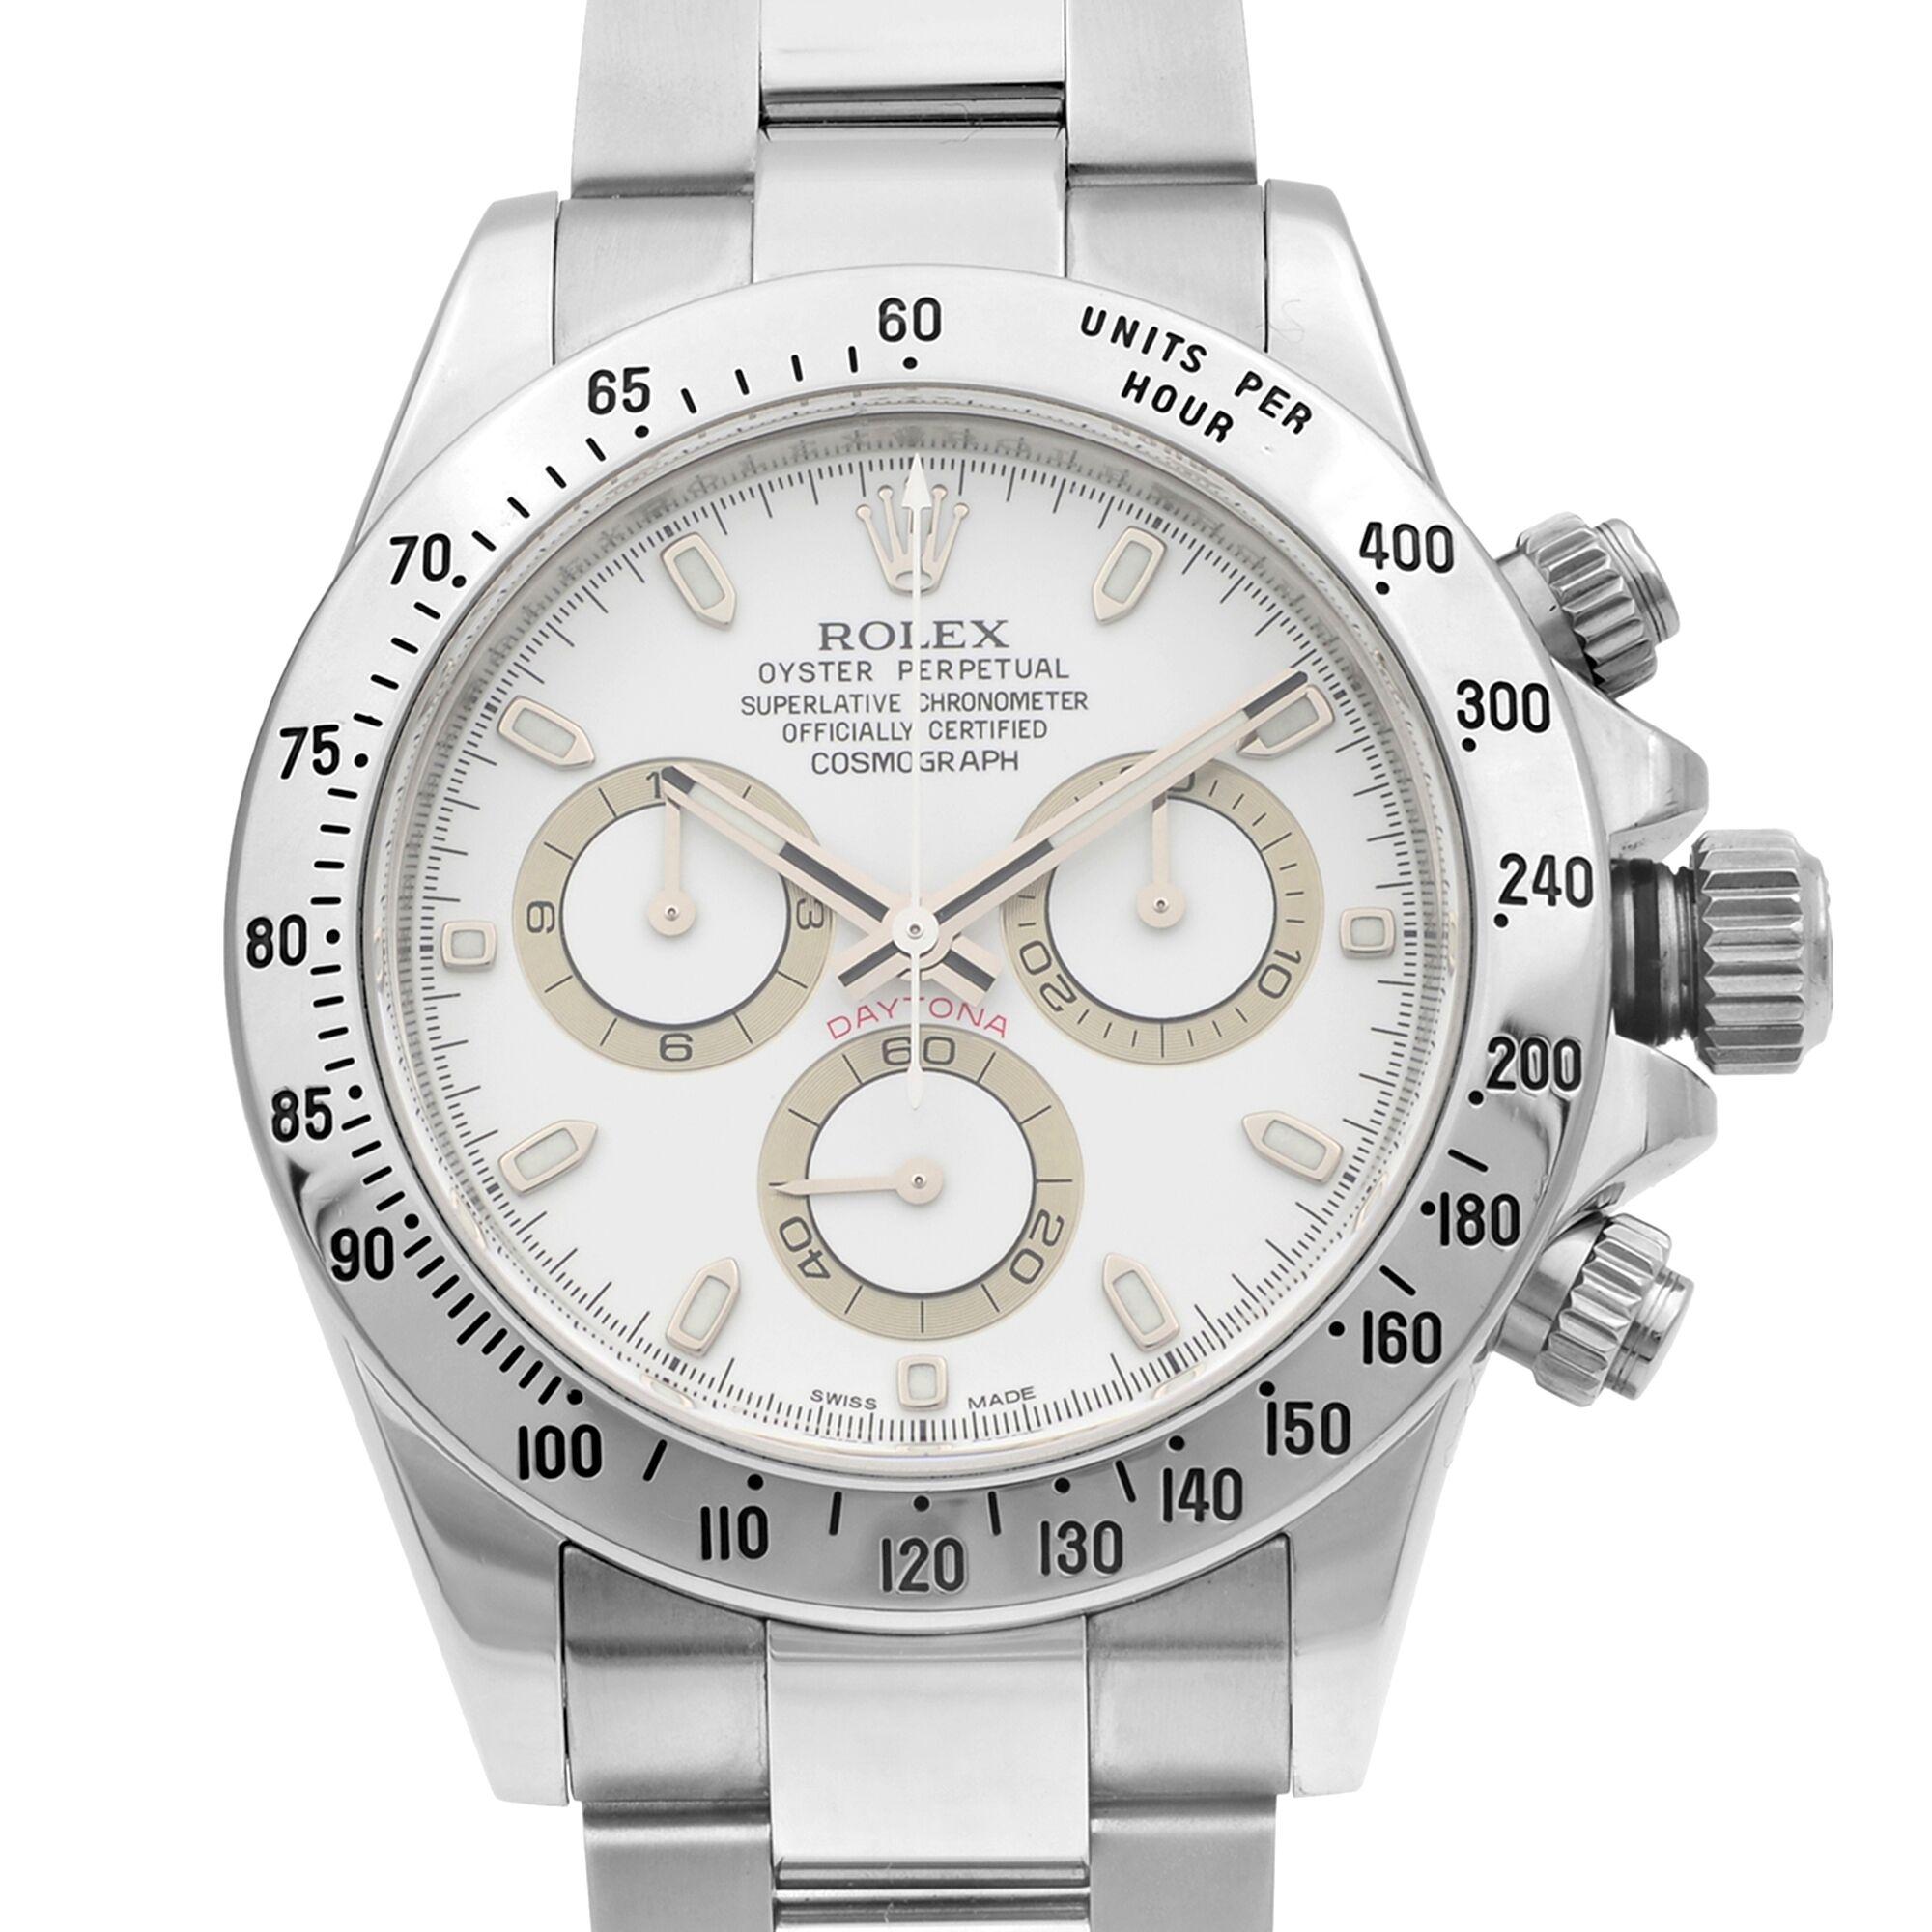 This pre-owned Rolex Daytona  116520  is a beautiful men's timepiece that is powered by mechanical (automatic) movement which is cased in a stainless steel case. It has a round shape face, chronograph, small seconds subdial, tachymeter dial and has